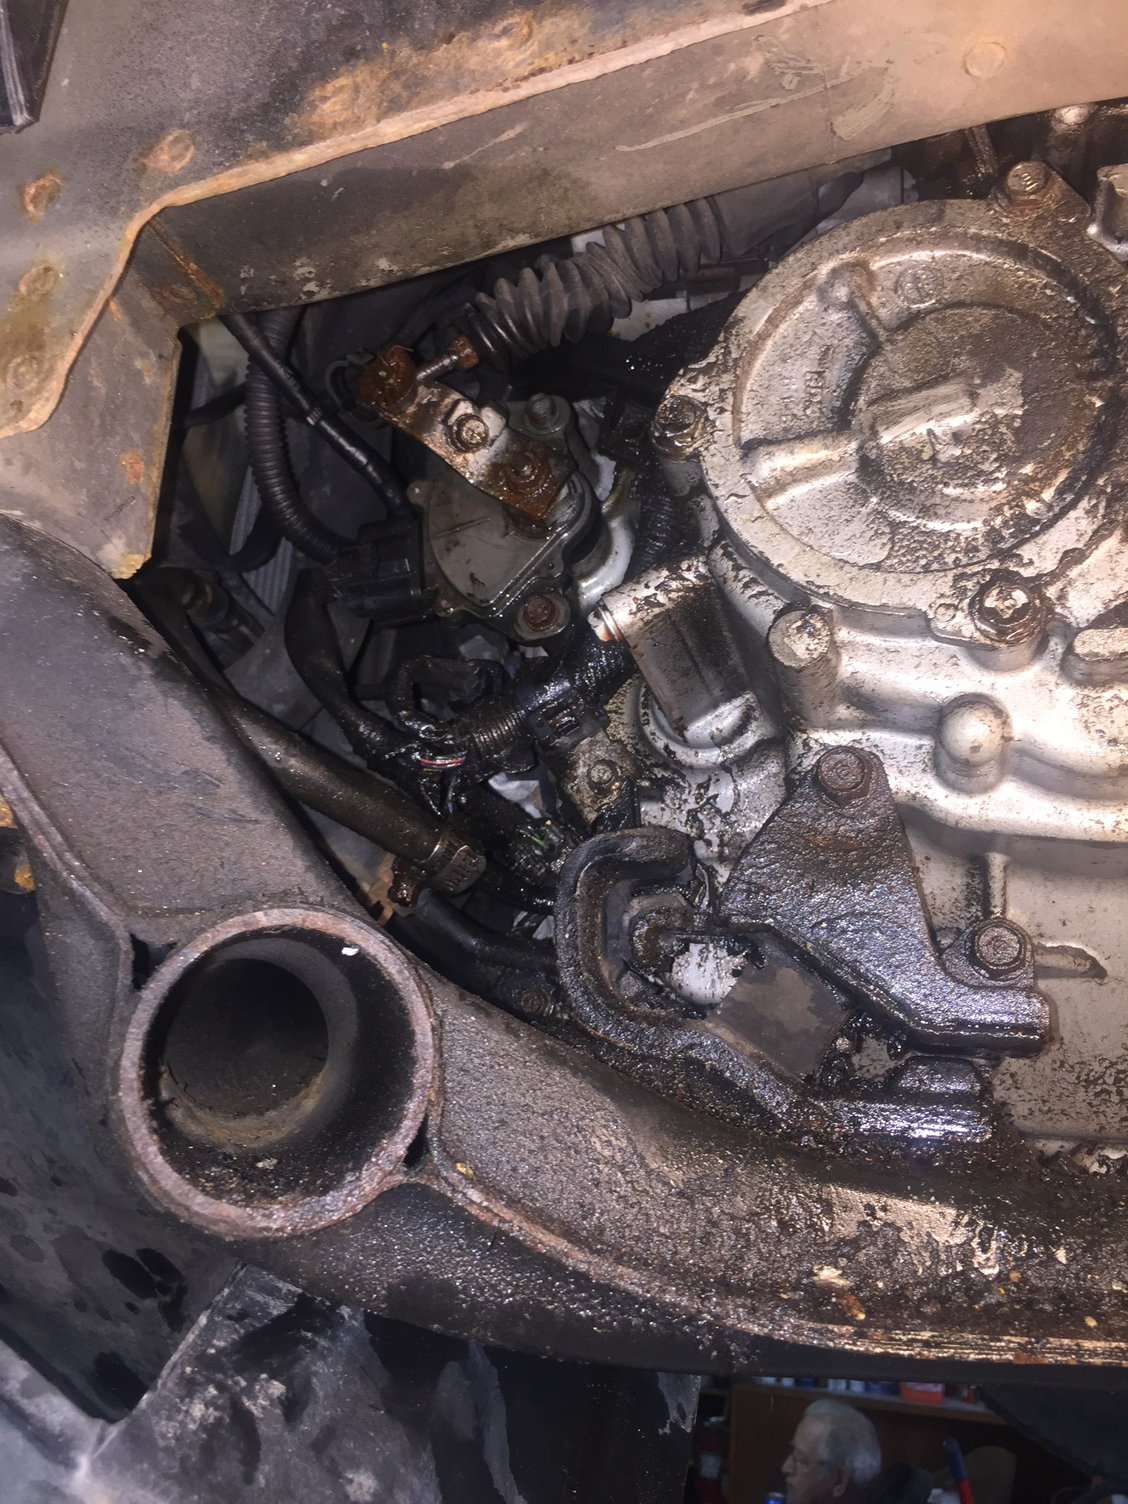 transmission shifts perfect but slips out of gear while idling